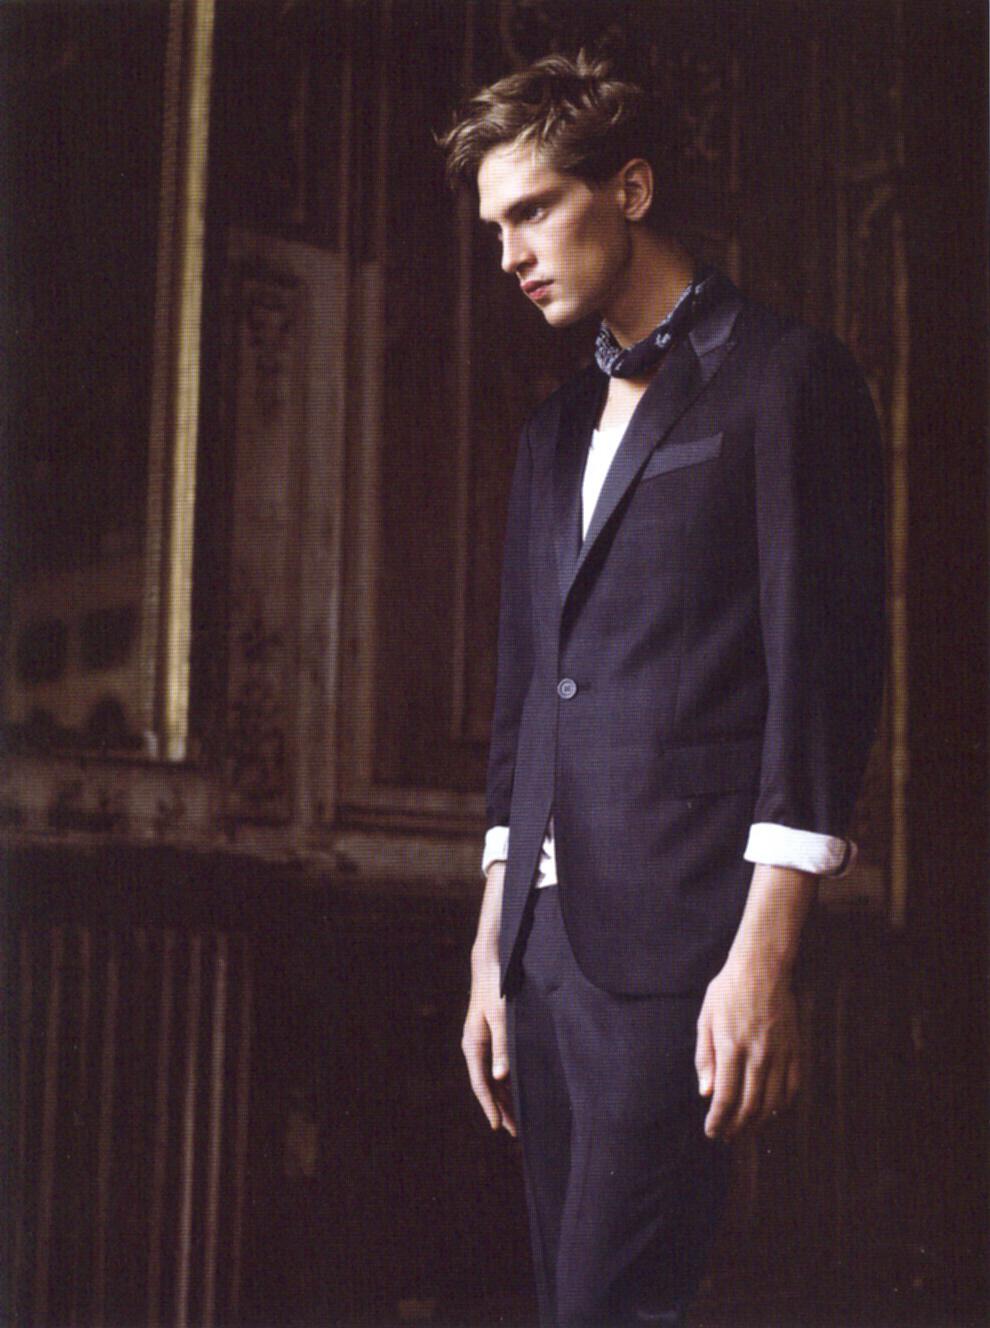 Mathias Lauridsen - Danish Prince: Givenchy ad campaign spring/ summer 08